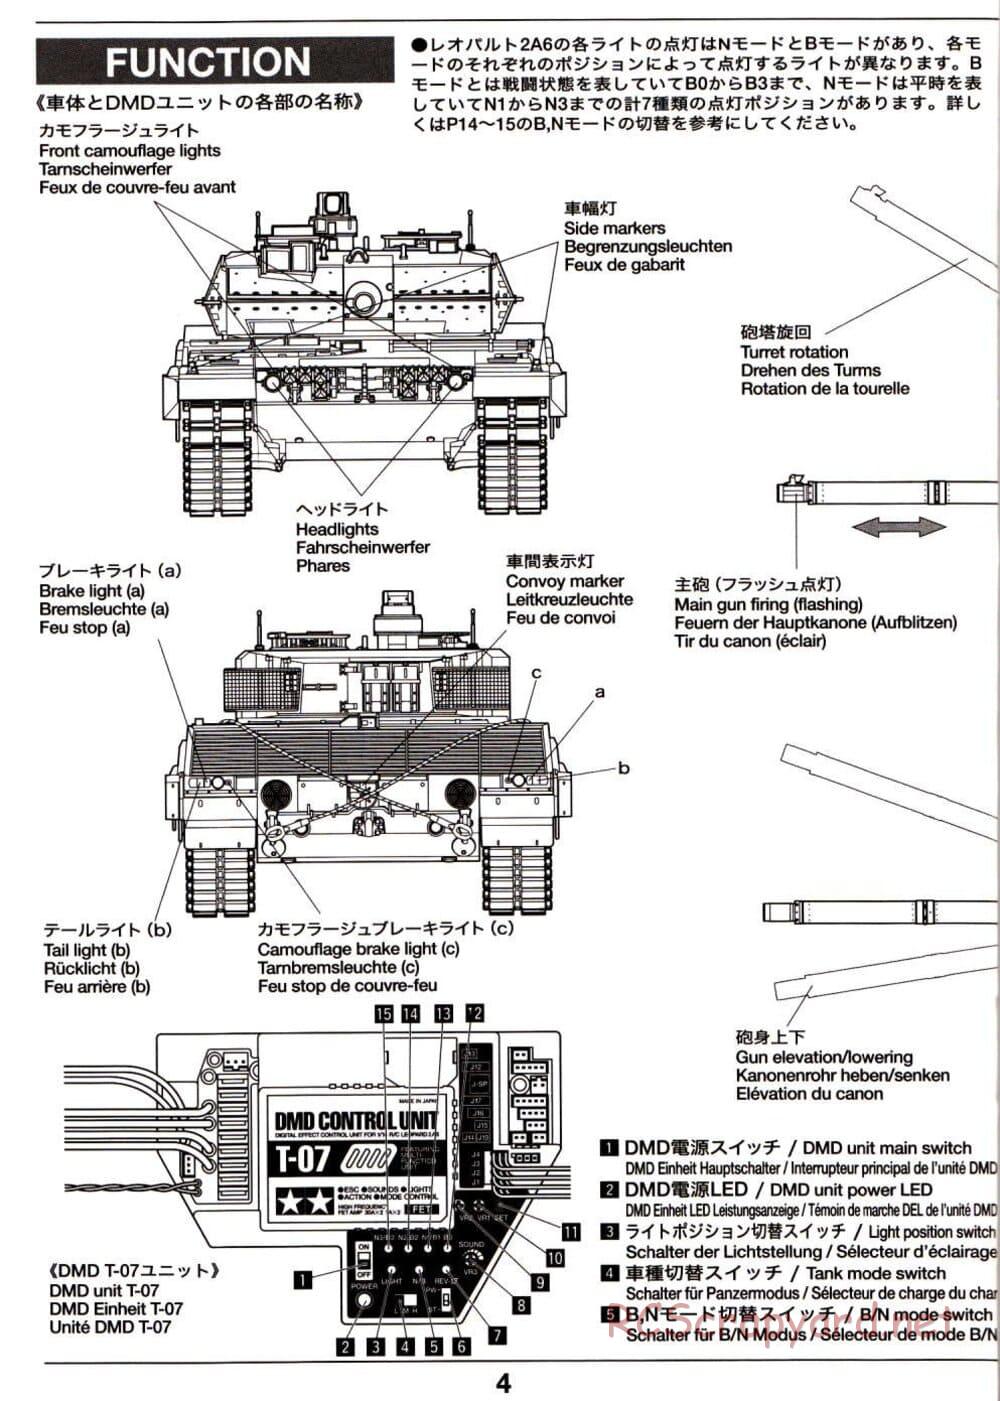 Tamiya - Leopard 2 A6 - 1/16 Scale Chassis - Operation Manual - Page 4